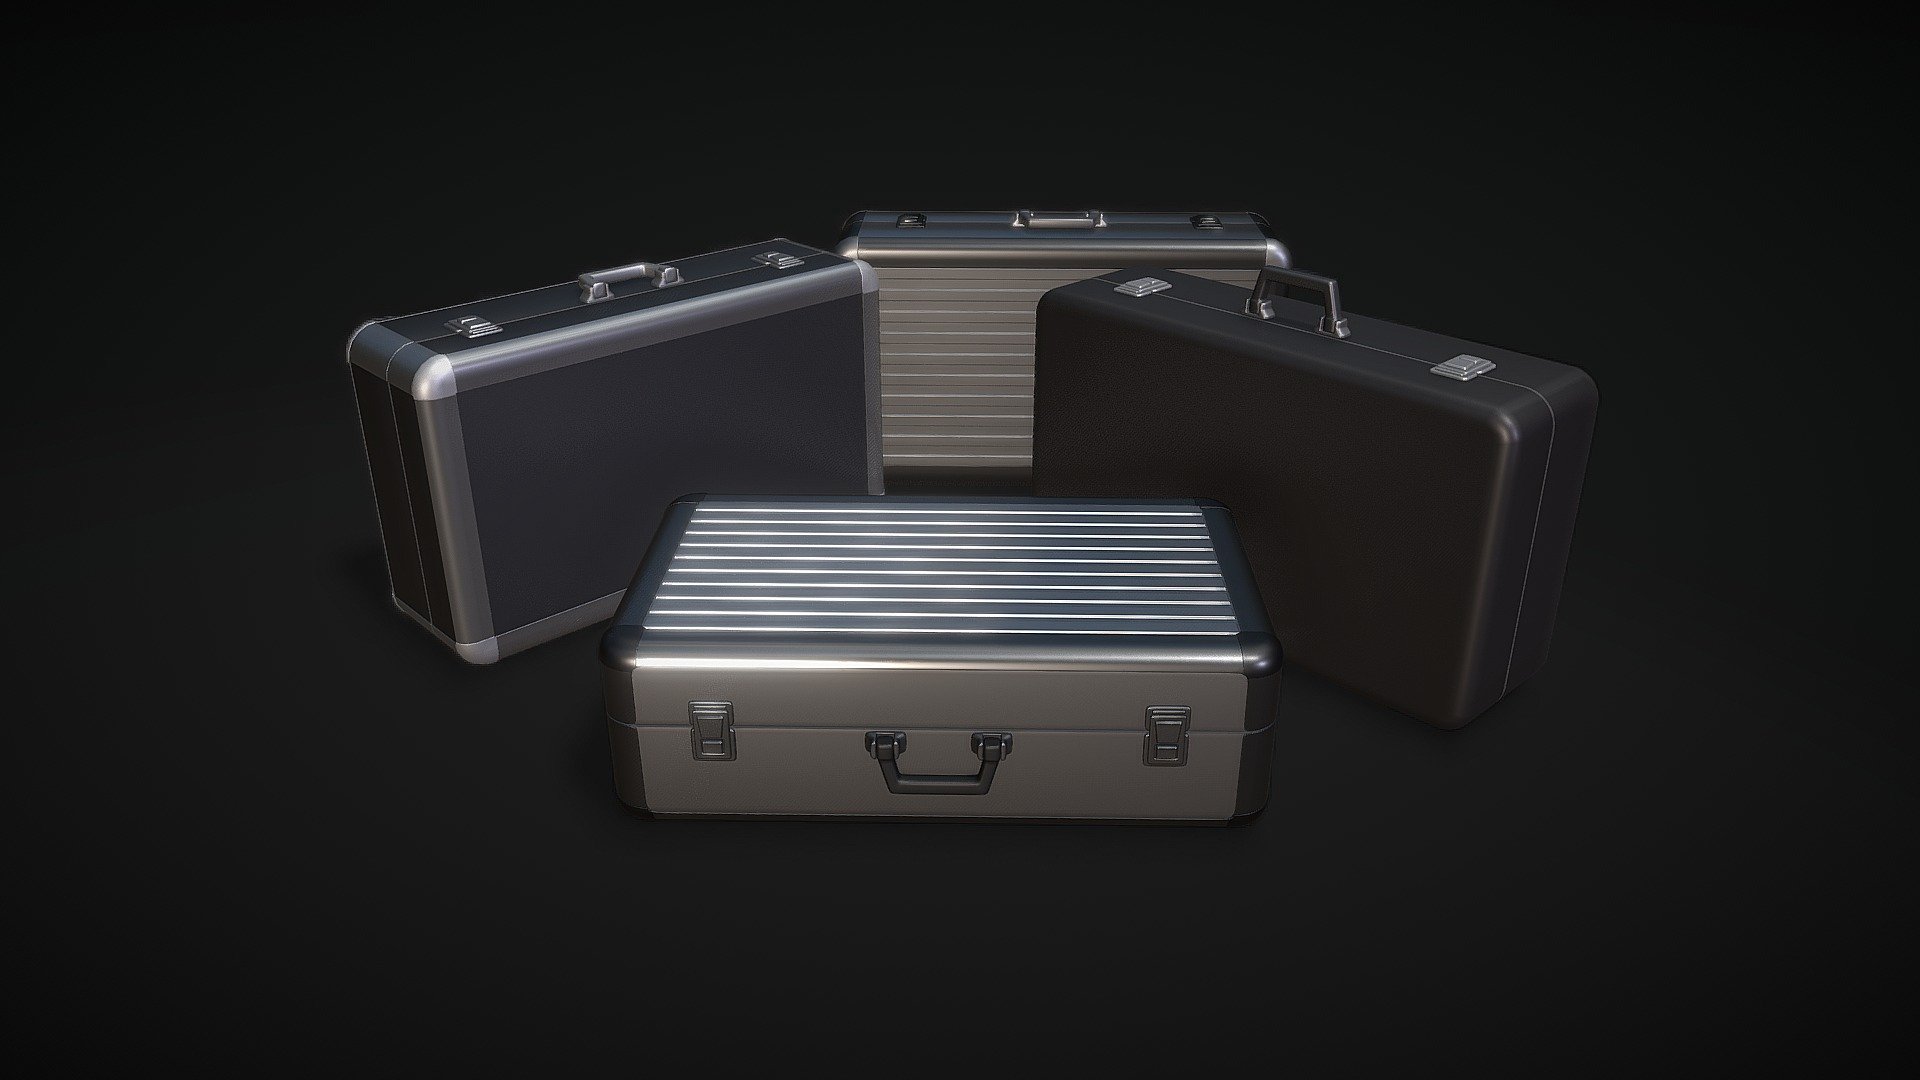 Two Types of Metal ( Aluminum ) Briefcases - Low &amp; High Poly

3D Model by BlockedGravity

Formats included: 

.c4d, .fbx, .3ds, .abc, .bip, .stl, .obj, .mtl 

Bonus Files:

.bip (Two KeyShot Render Scenes)

KeyShot Render Preview Images :

KeyShot Scene-1




KeyShot Scene-2
 - Two Types of Metal ( Aluminum ) Briefcases - Buy Royalty Free 3D model by BlockedGravity 3d model